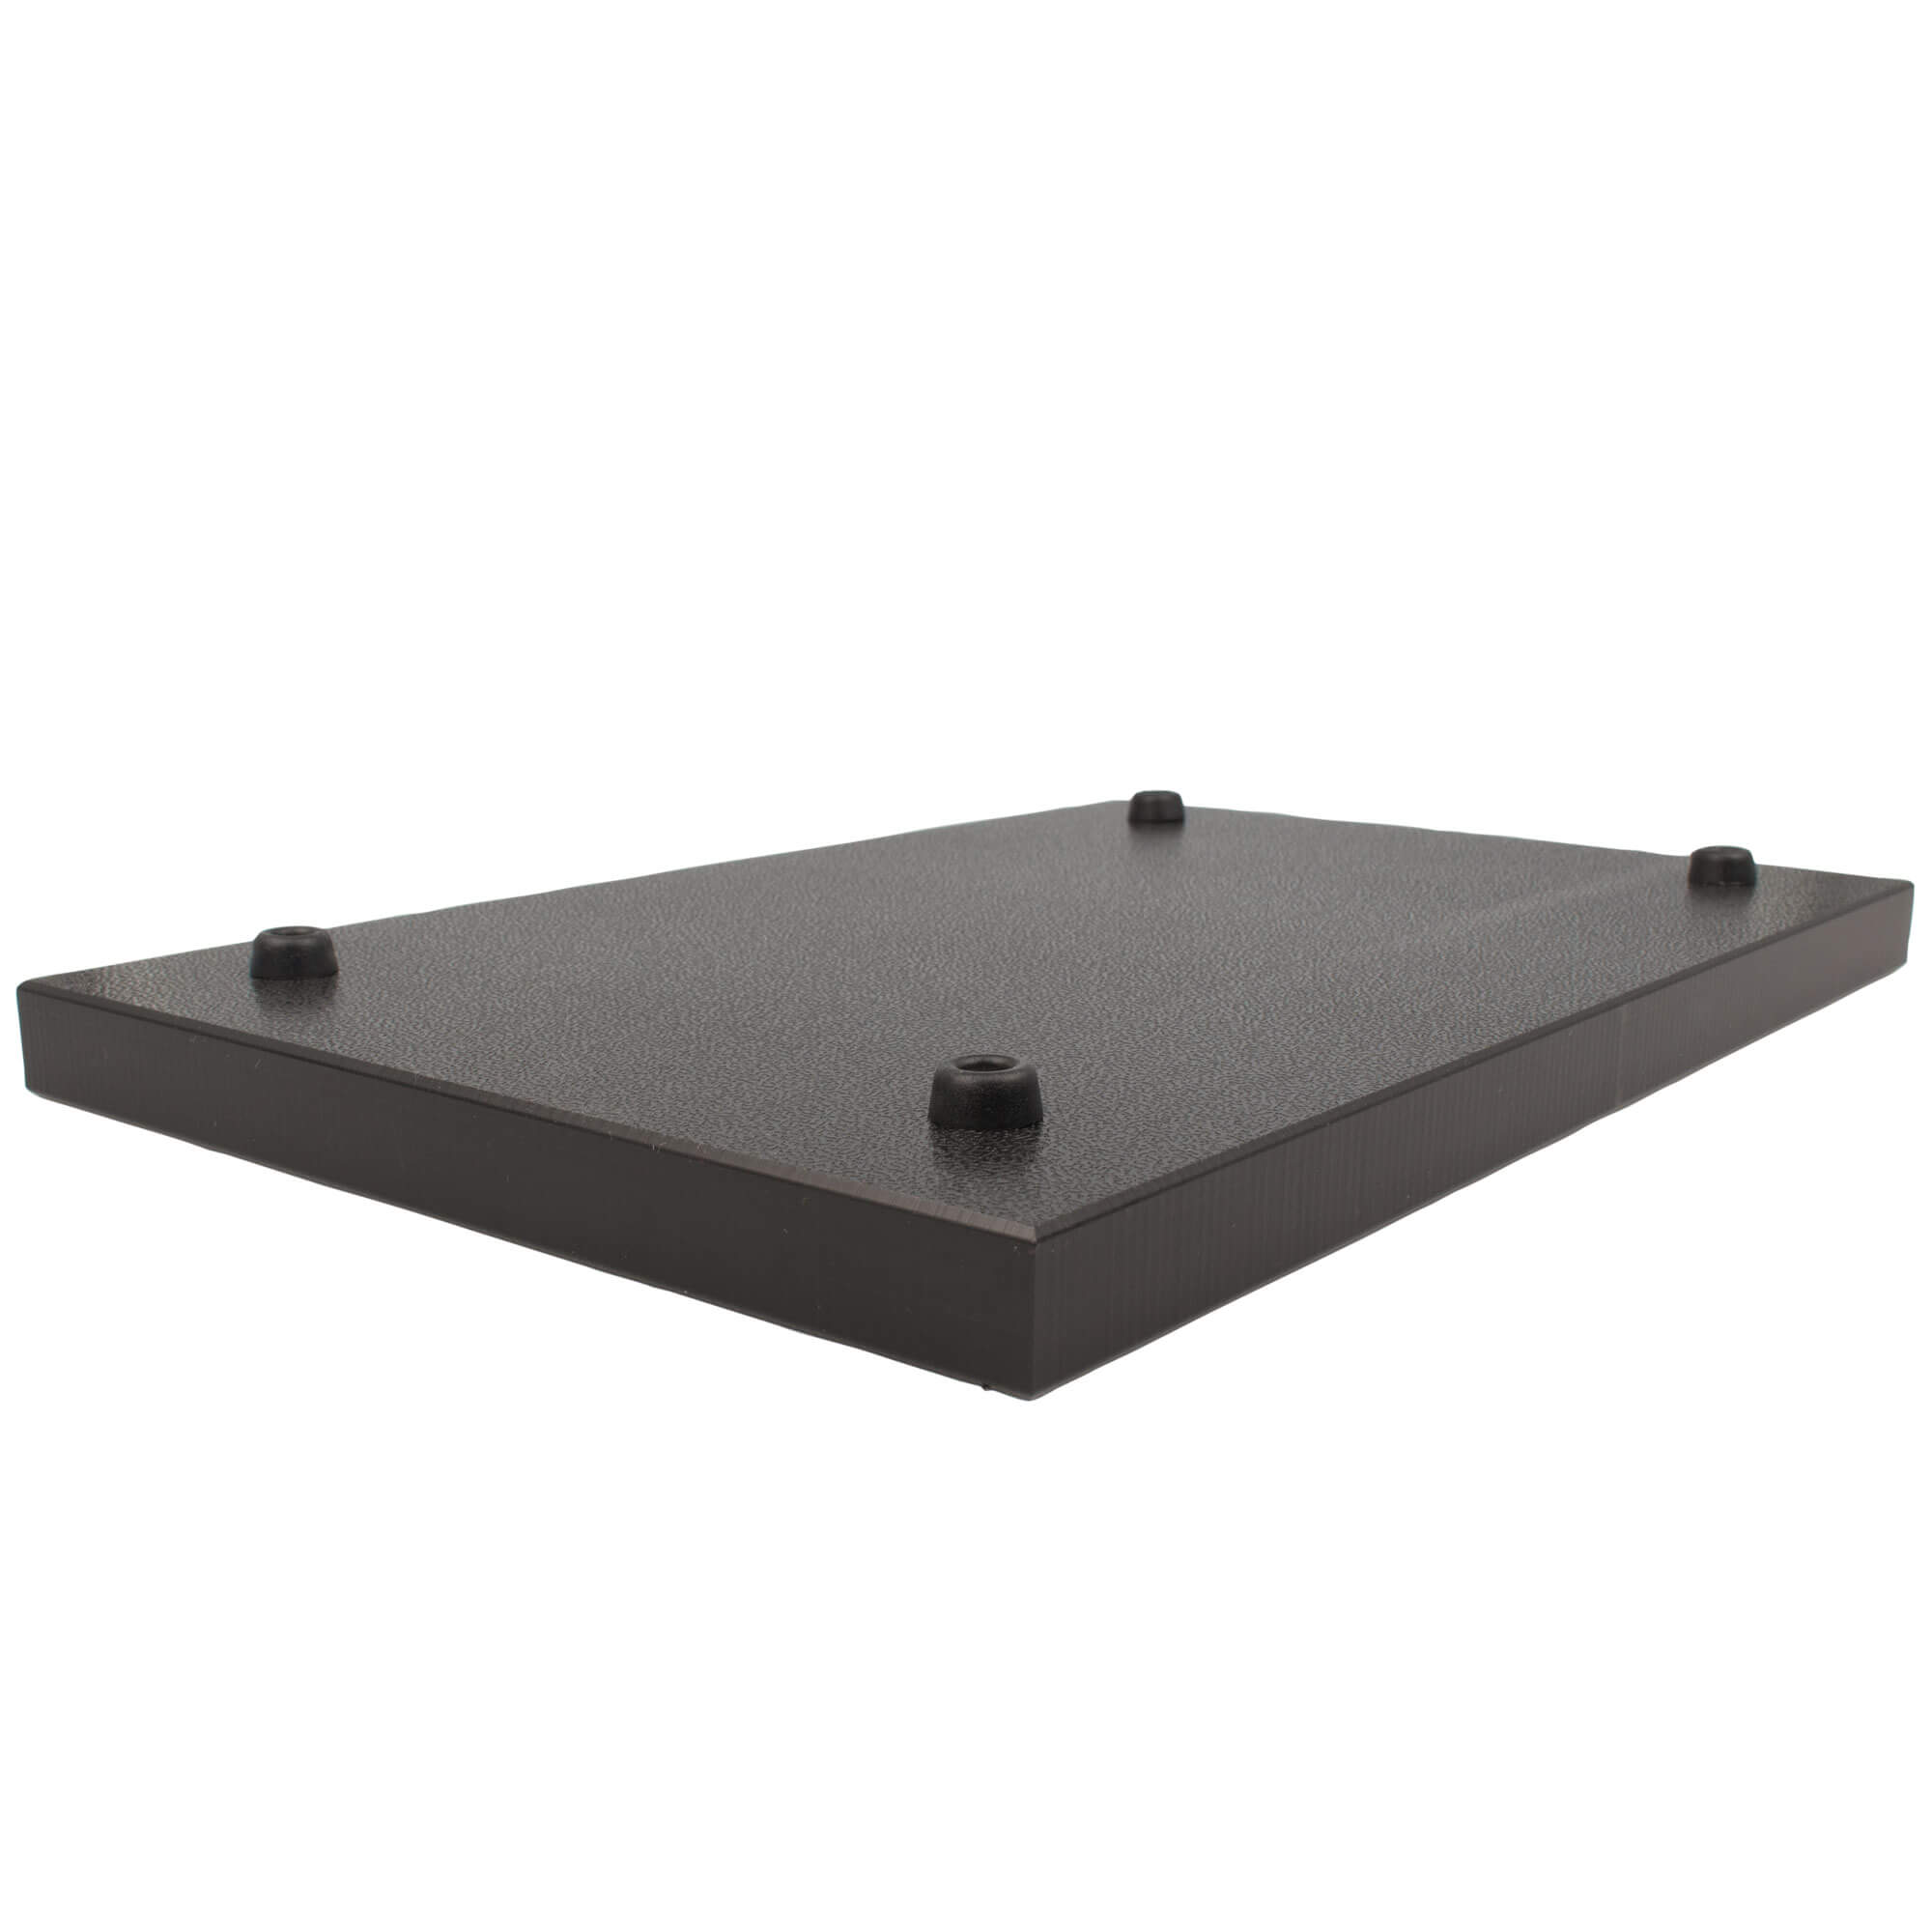 Cutting board with juice groove, HDPE black - 29,5x19,5cm